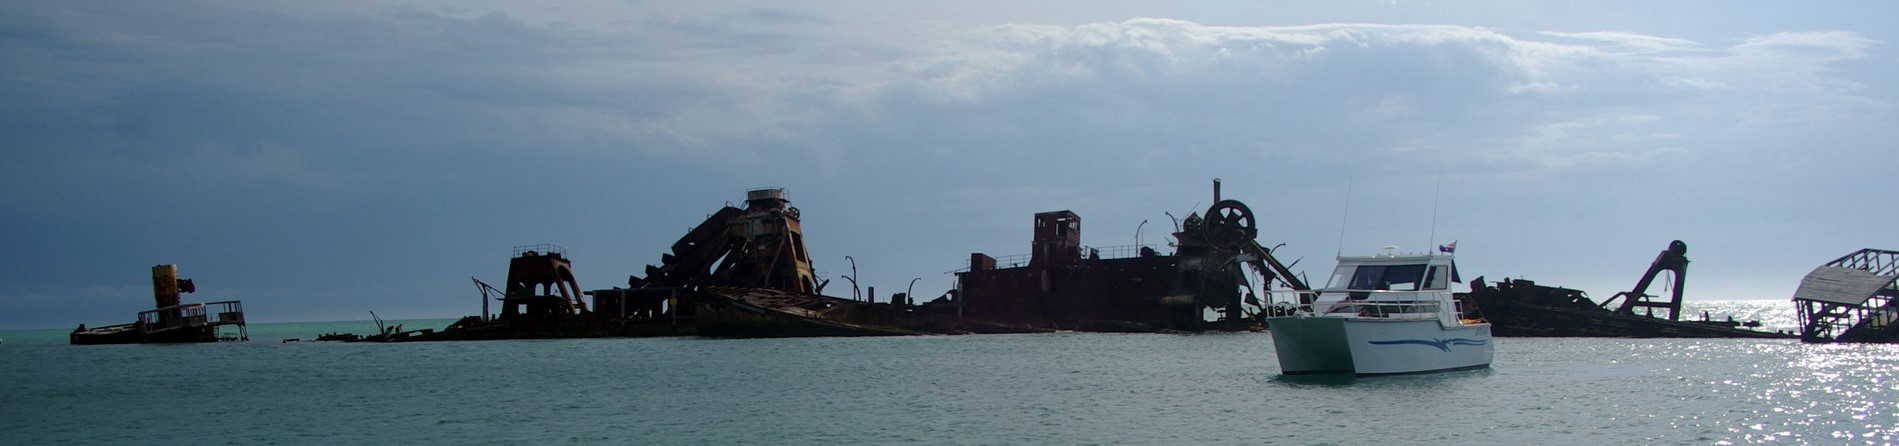 How did the Tangalooma Wrecks get there?